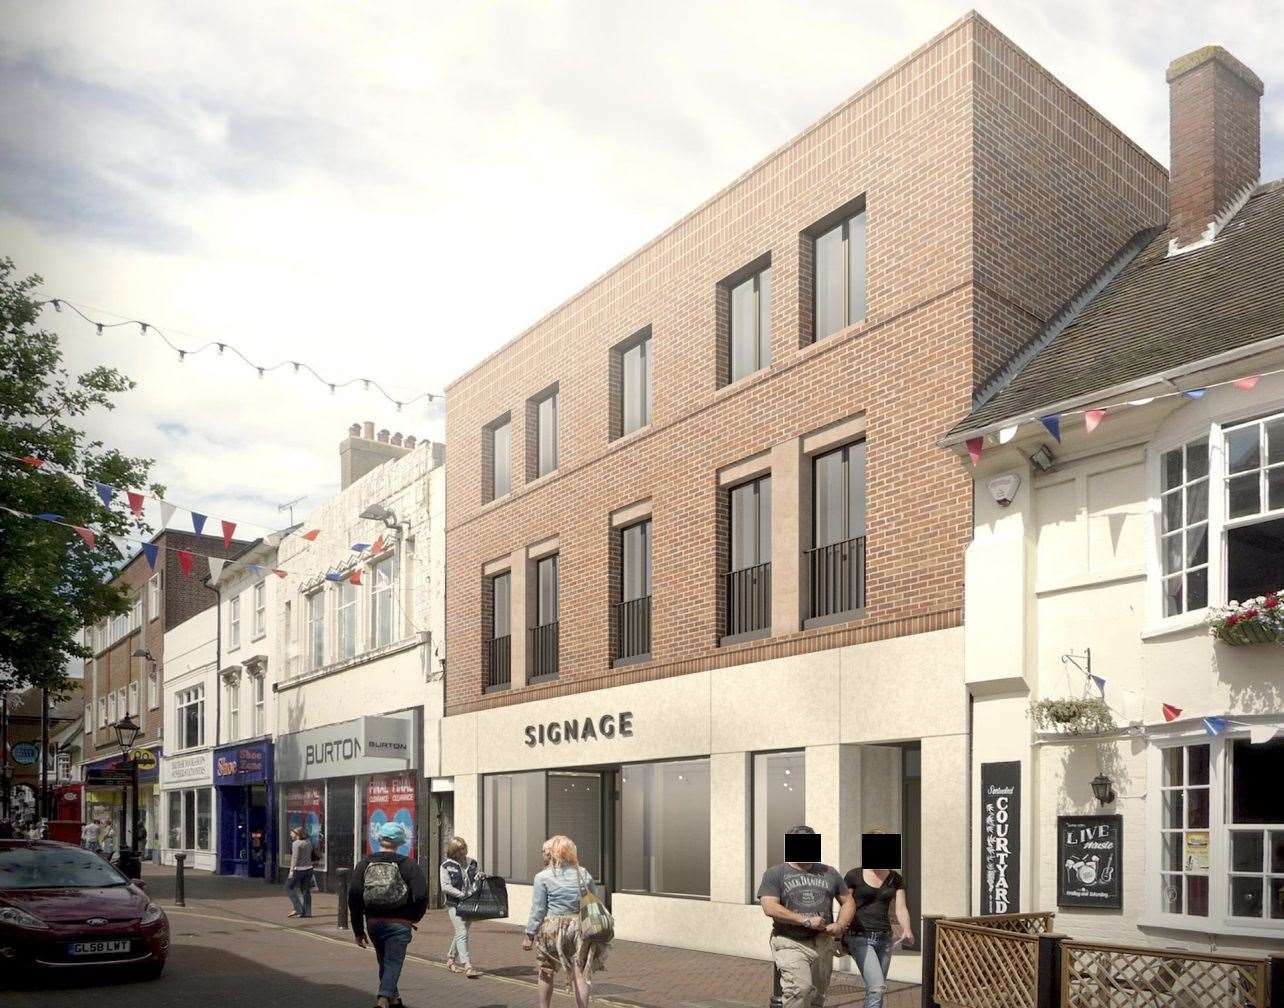 How the development could look from the front. Picture: Rutter Architects